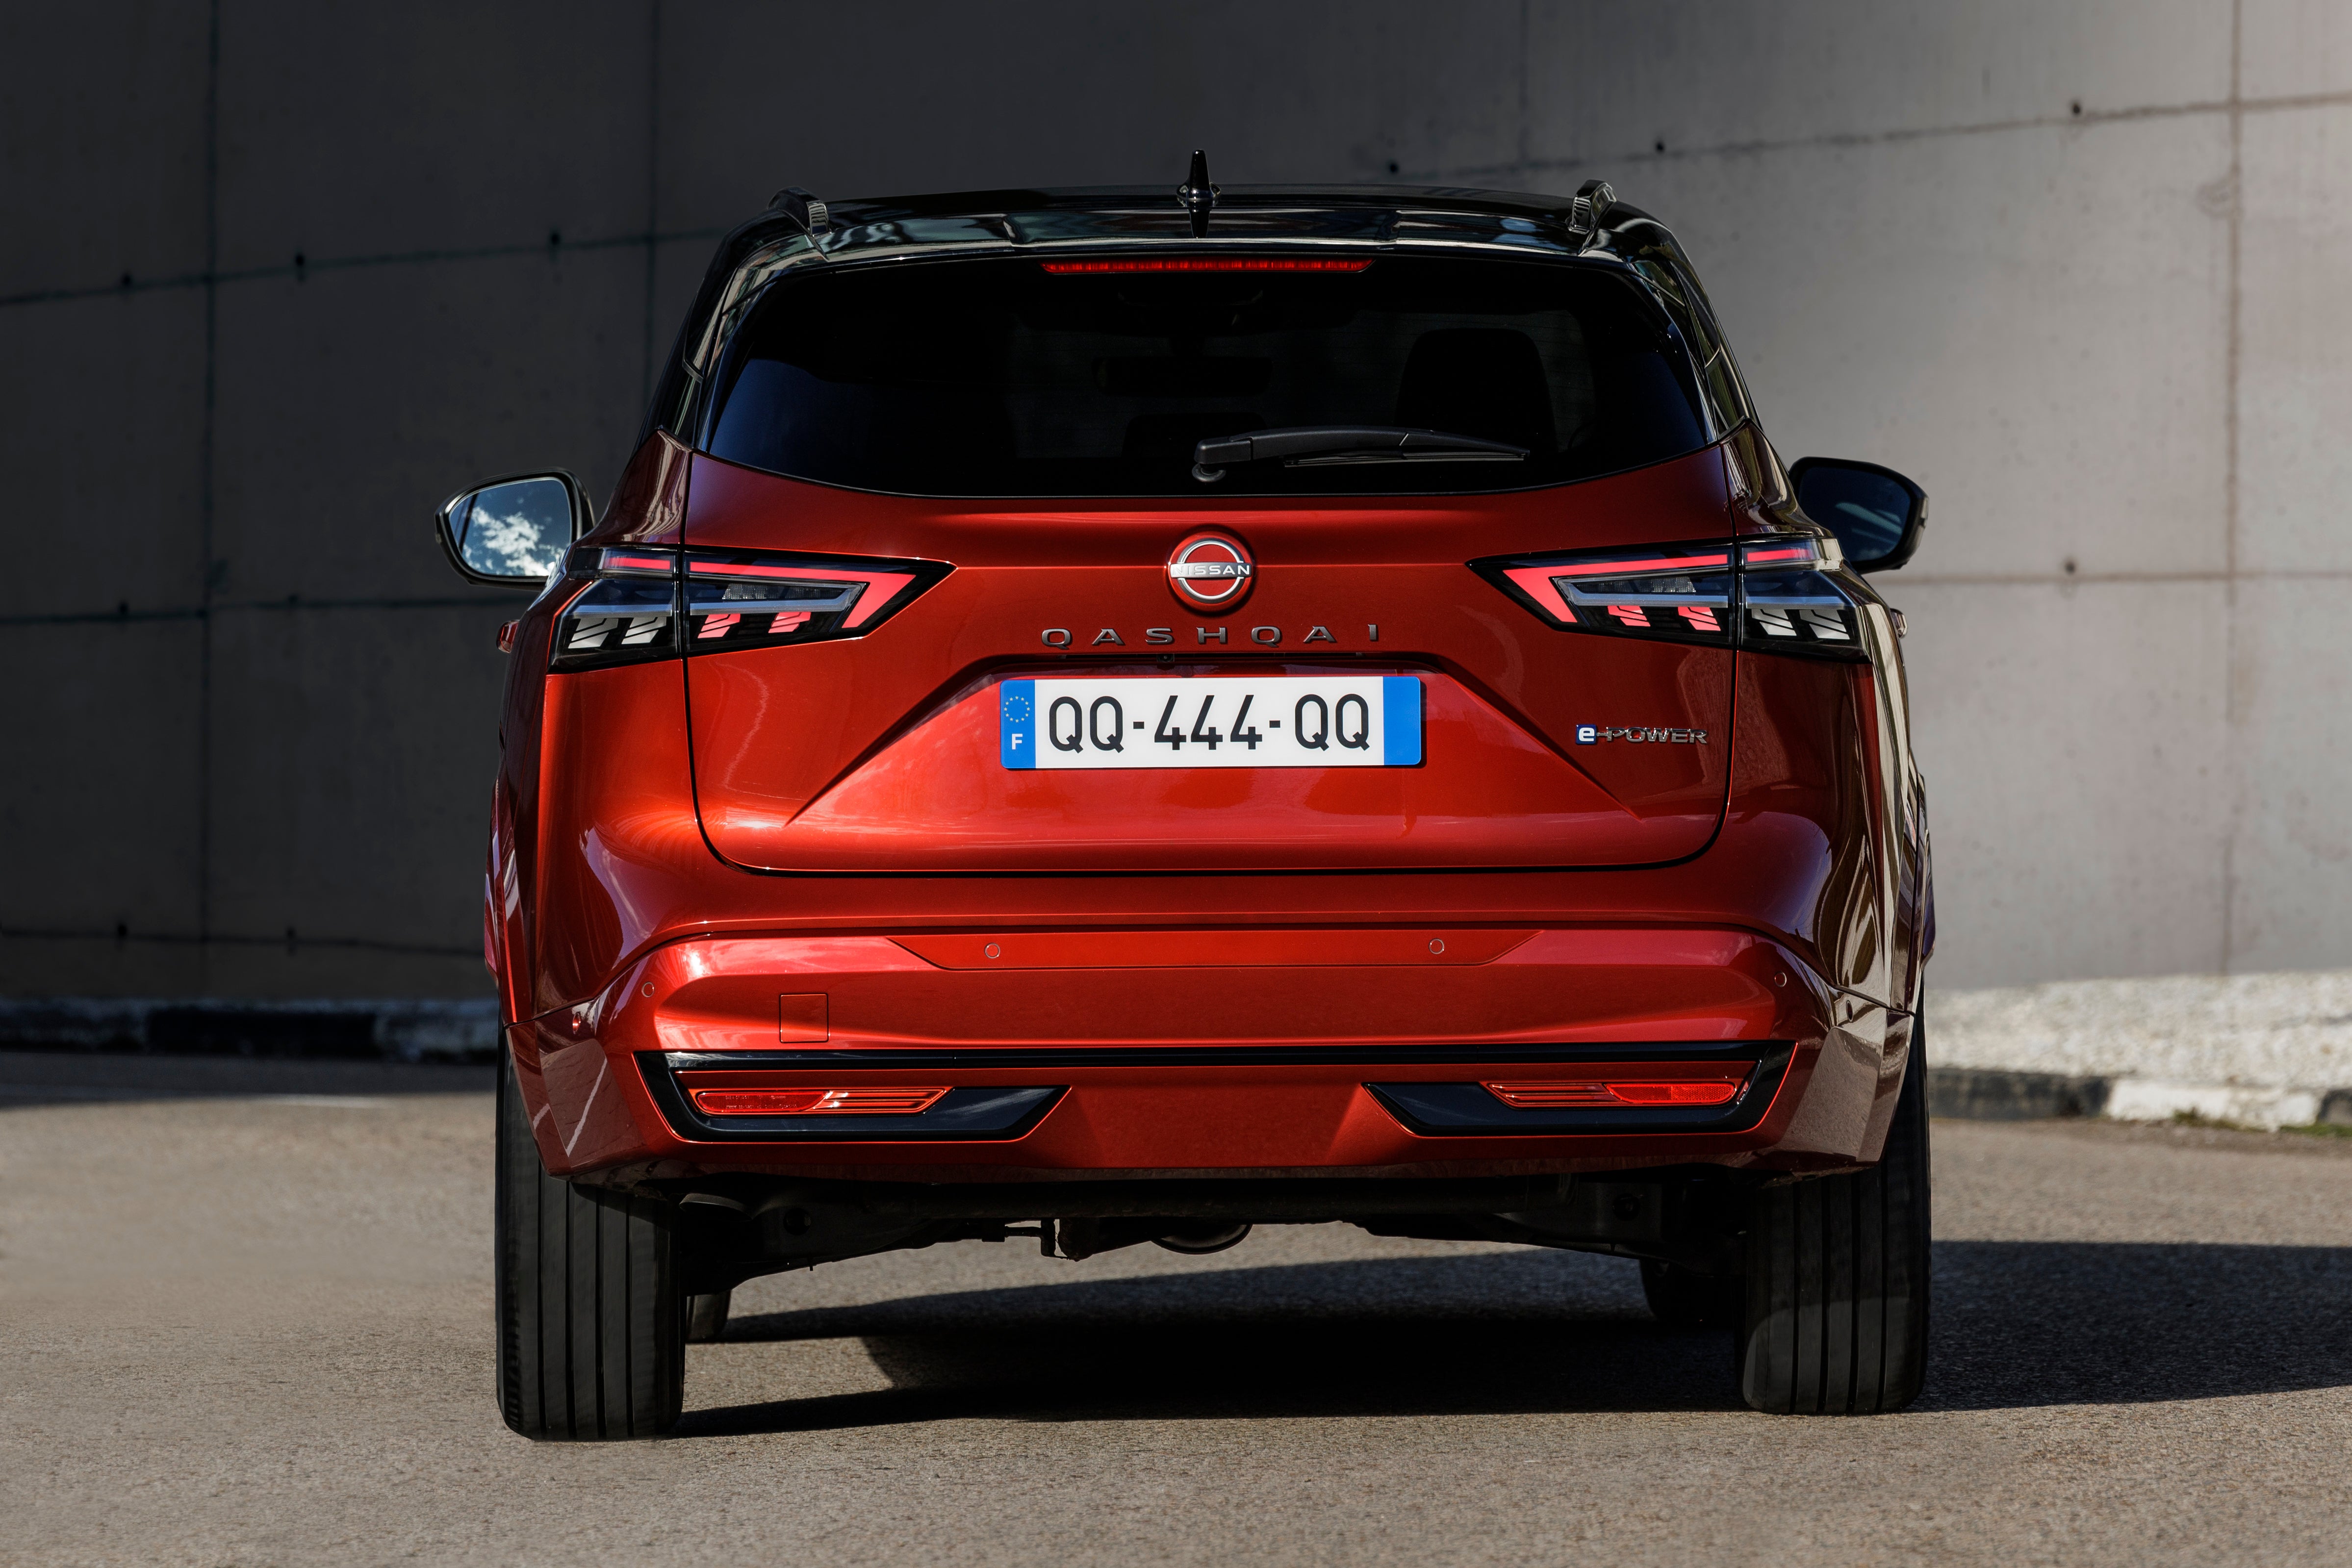 A hands-free automatic opening power tailgate adds to the Qashqai’s everyday ease of use